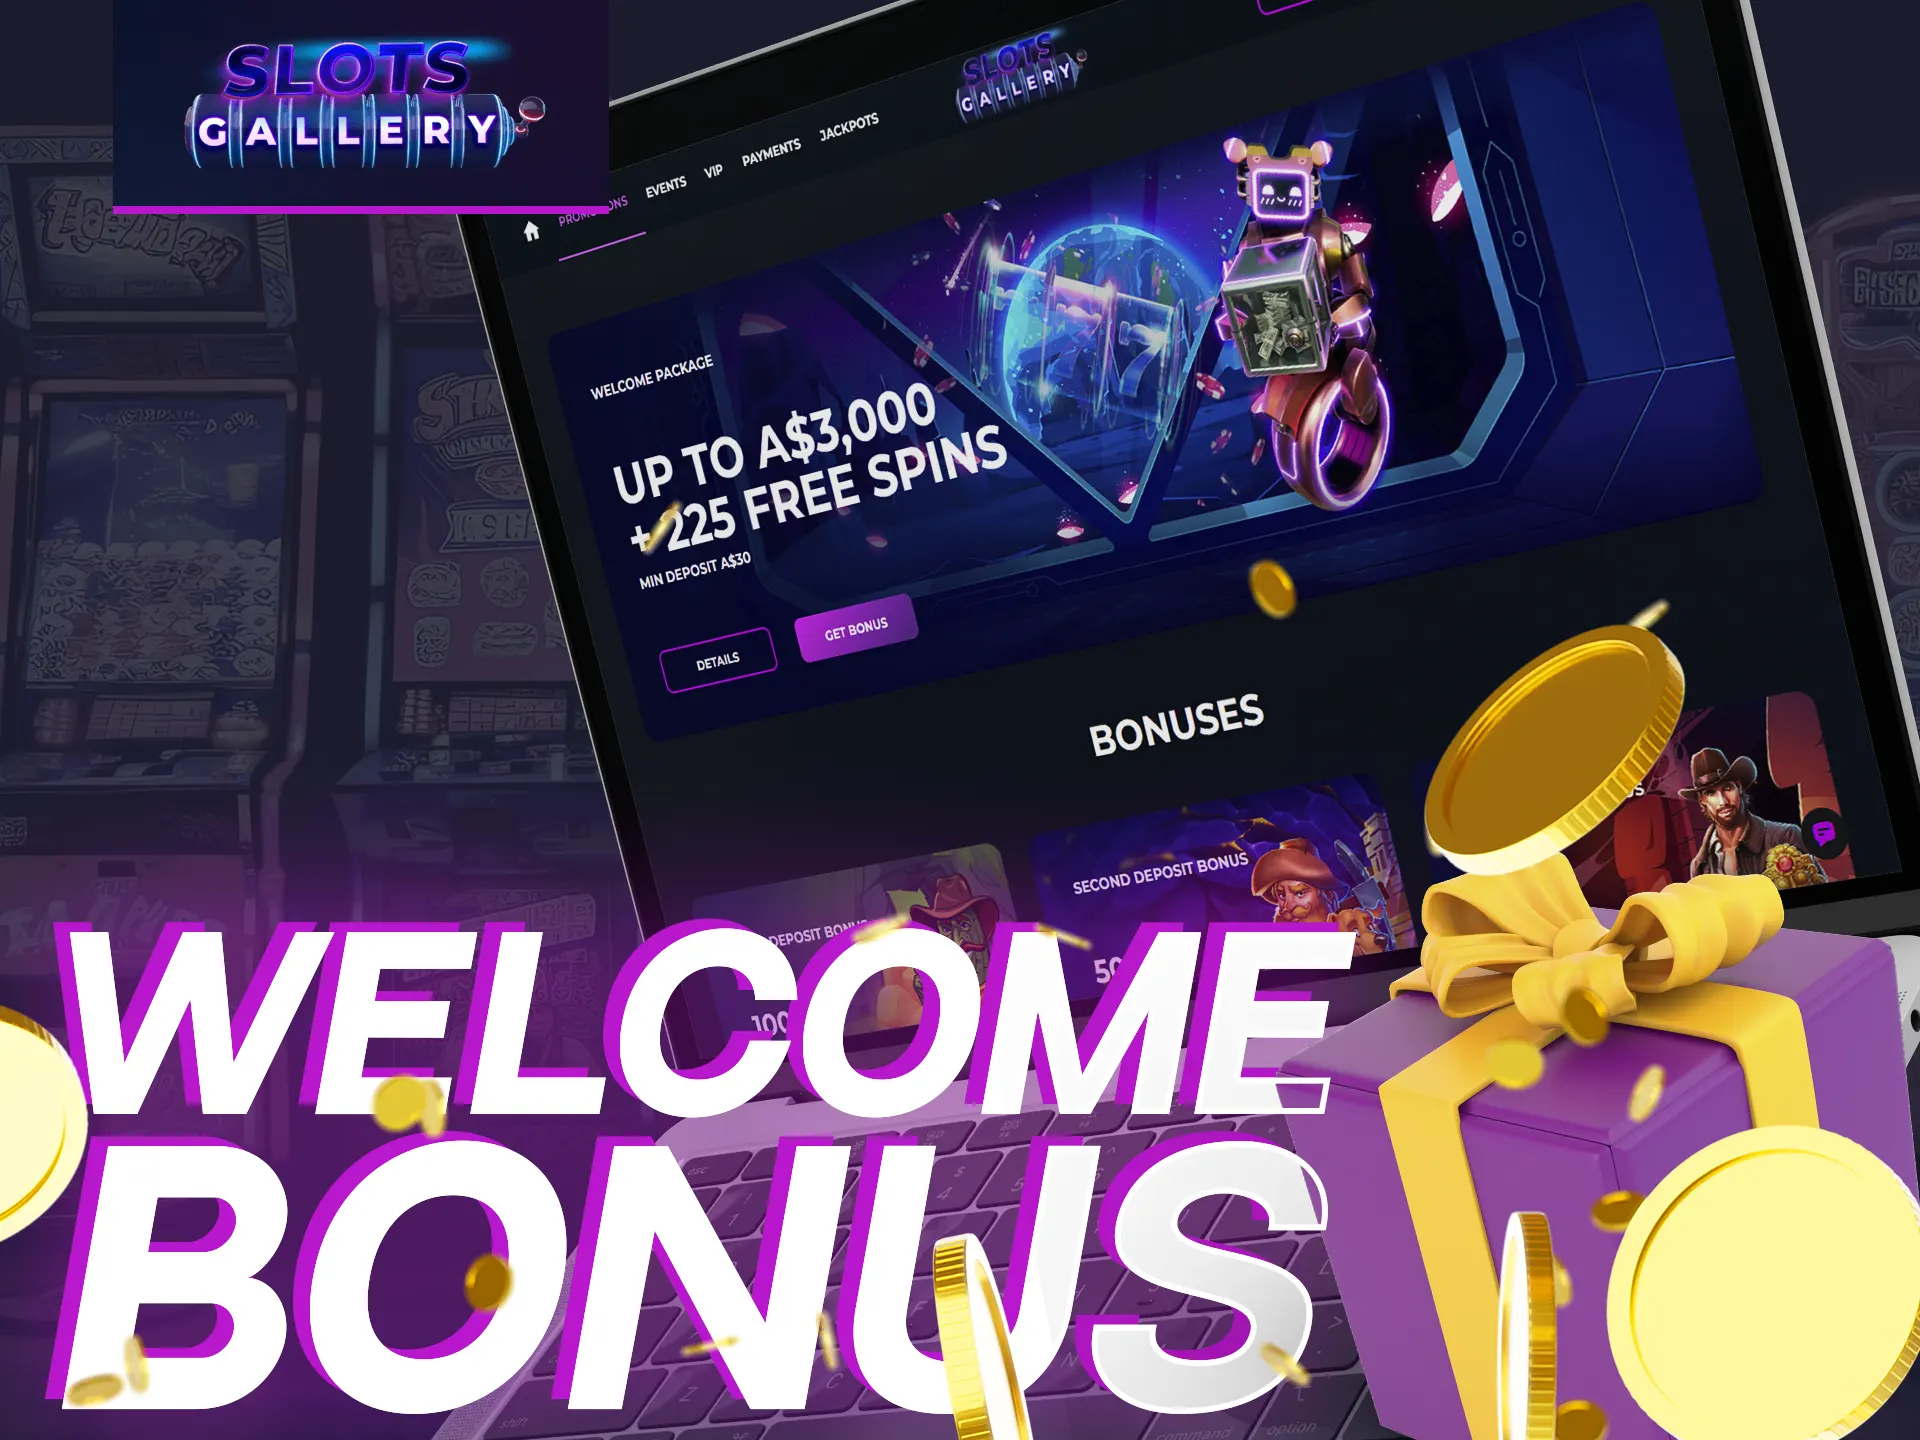 Get a huge multiplication of your deposit amount with Welcome Bonus from slots gallery.